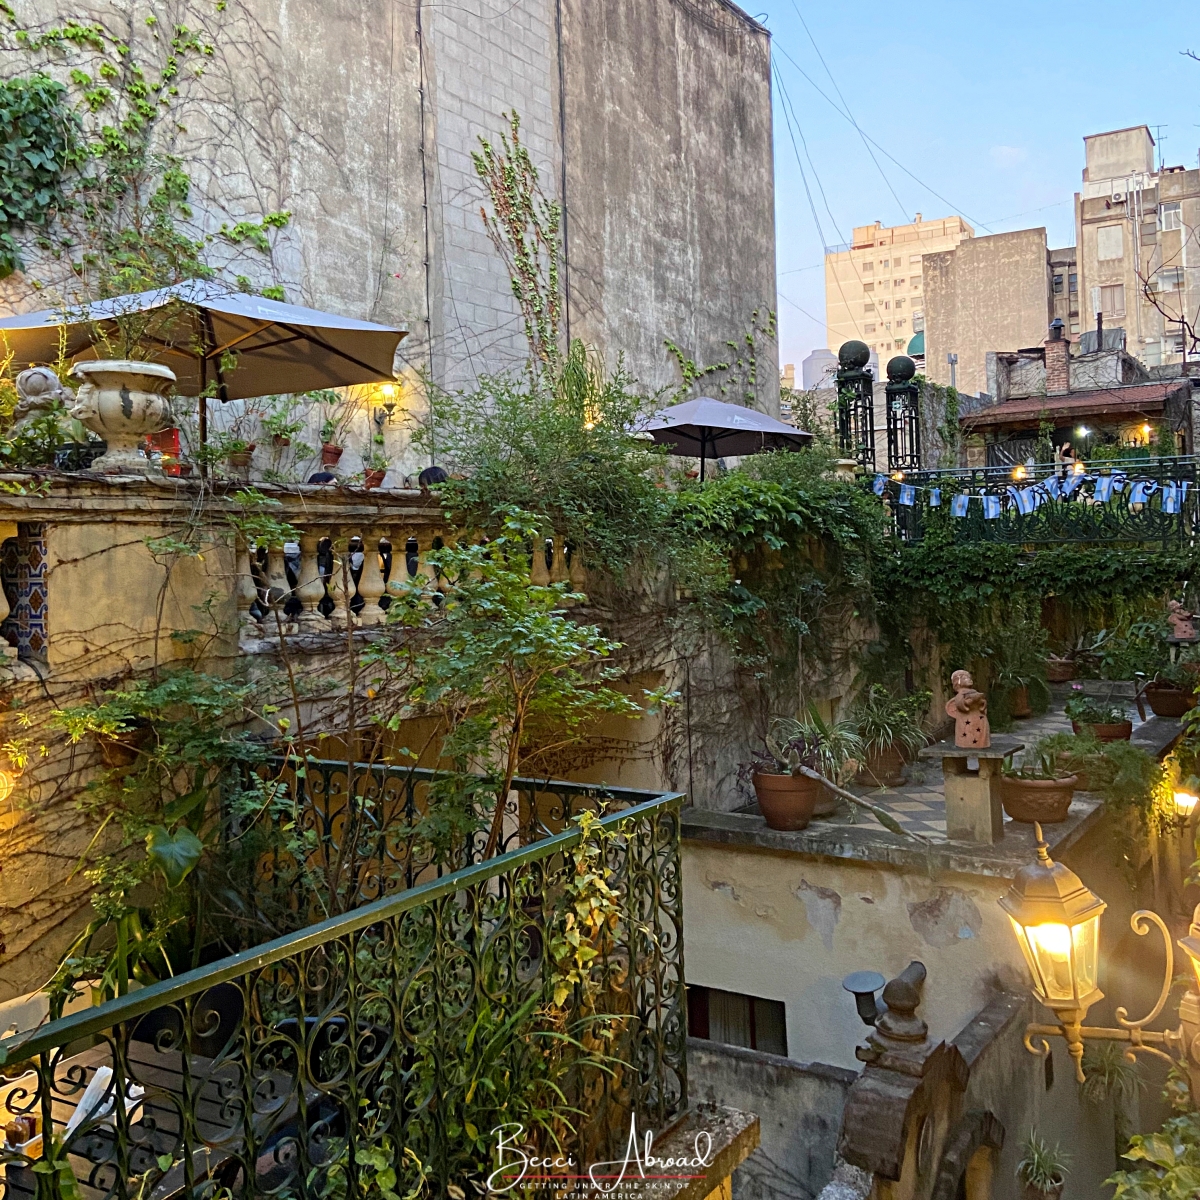 Buenos Aires' best-kept secrets are waiting to be explored